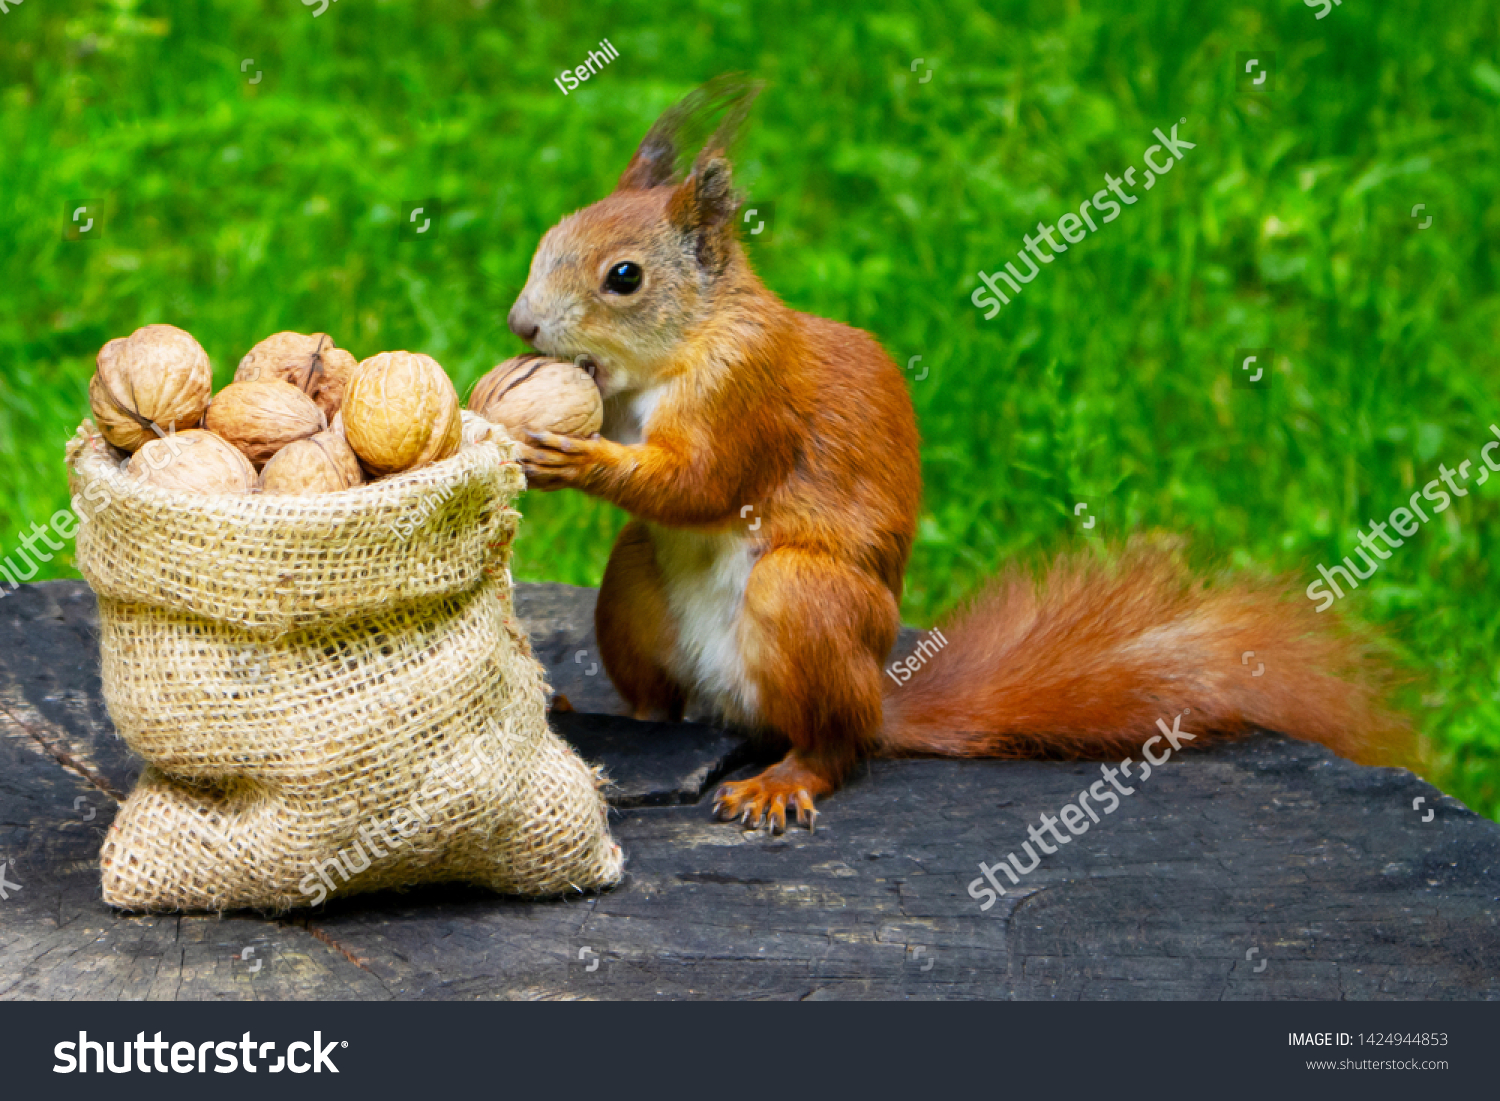 Squirrel eats nuts in the park. A bag with walnuts - a gift for a squirrel. #1424944853